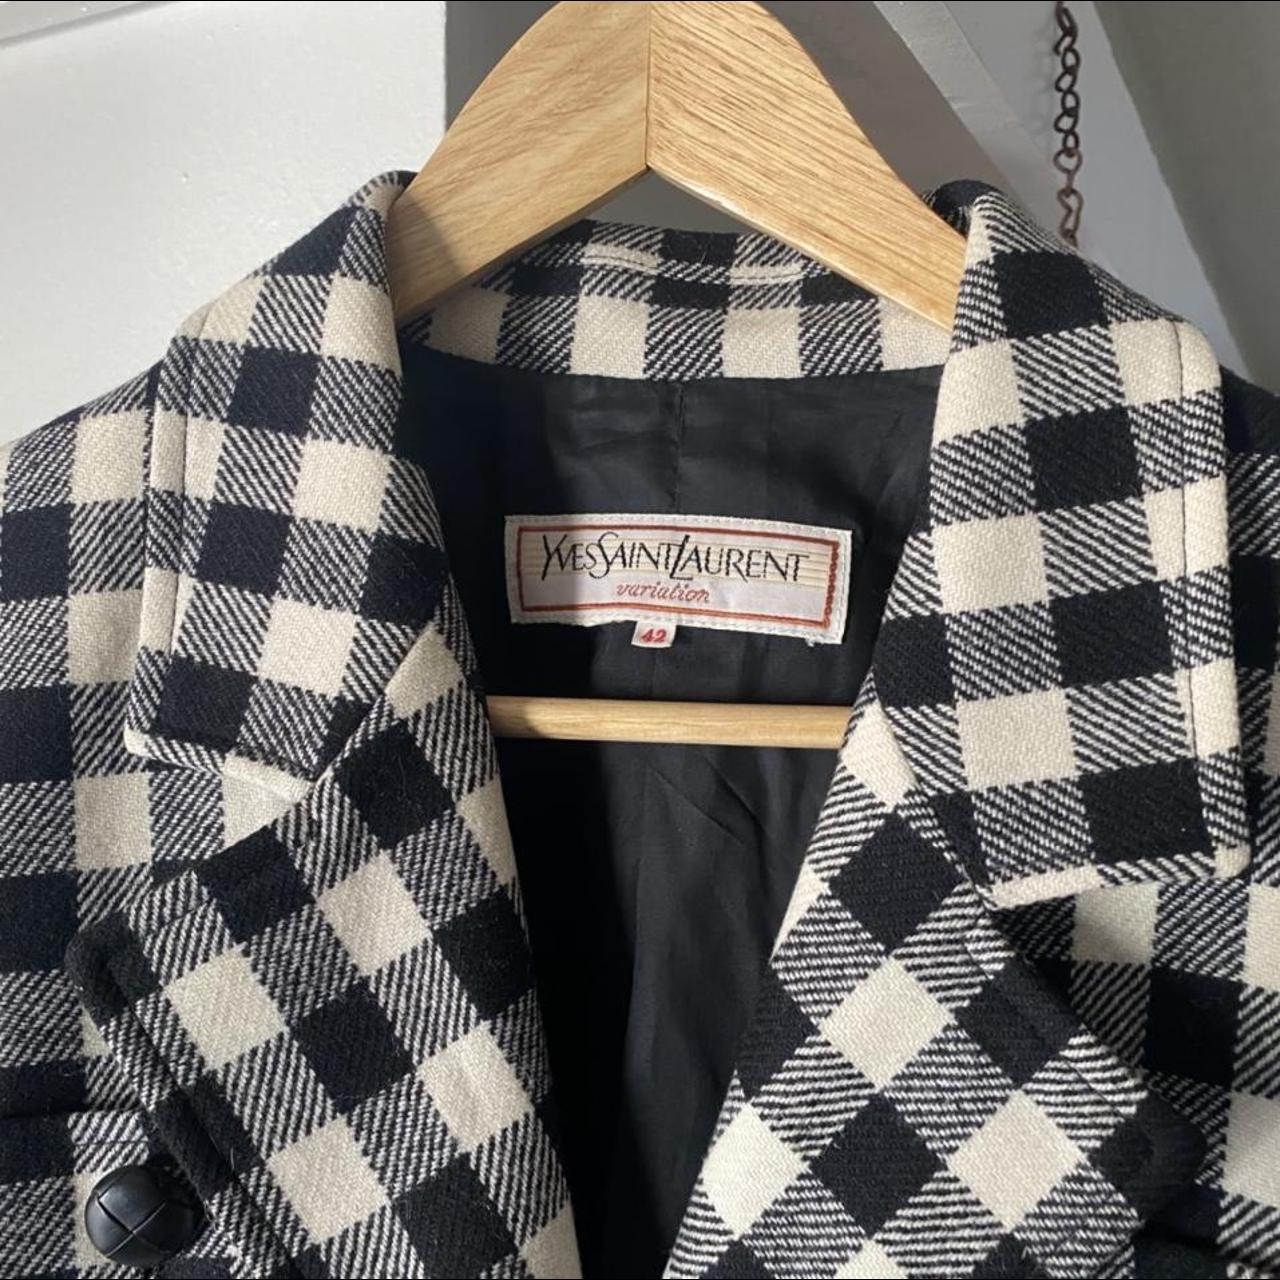 YSL tag authenticity? Not sure about this 😅 : r/Depop